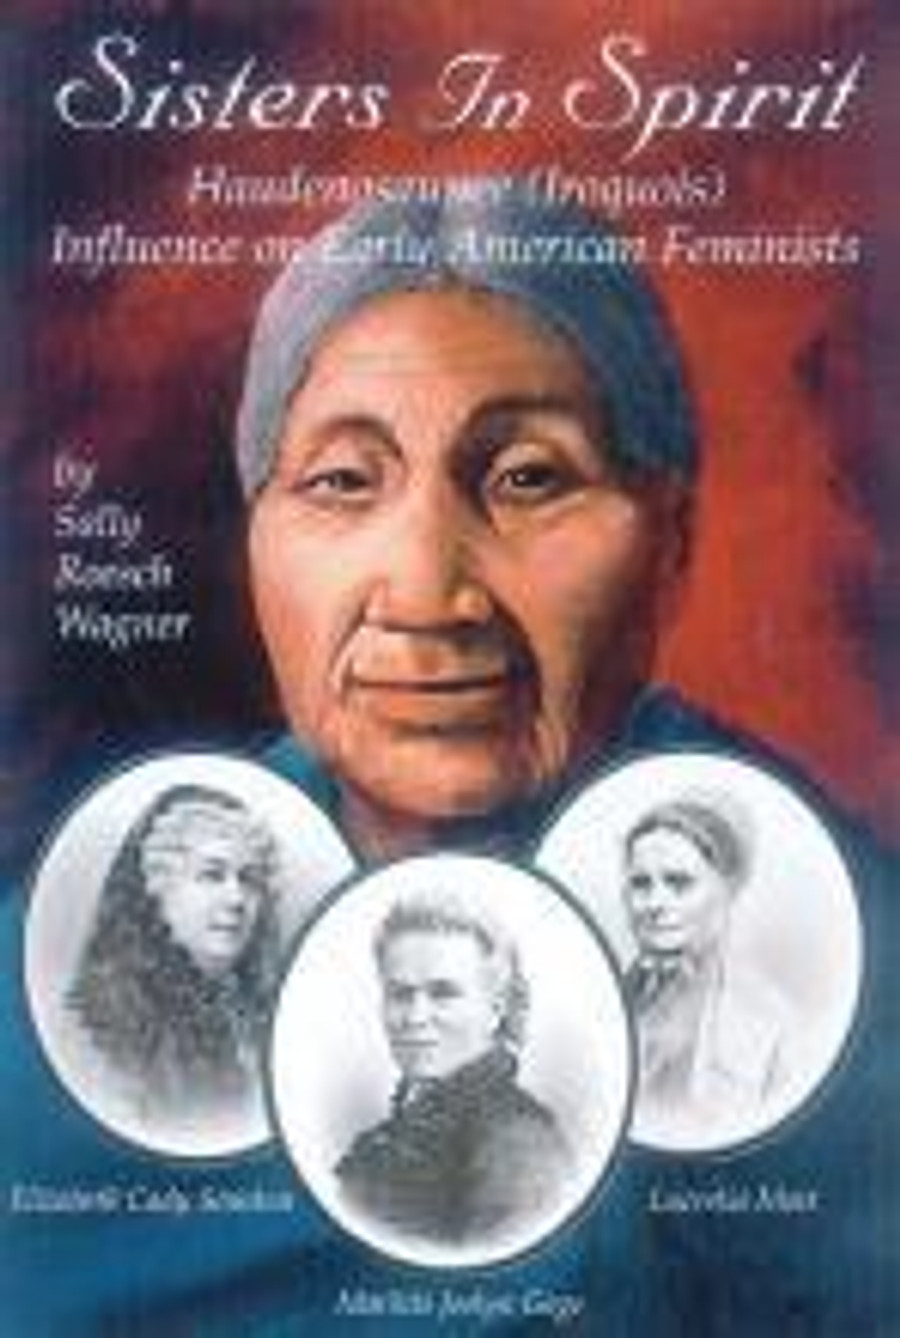 Sisters in Spirit by Sally Roesch Wagner